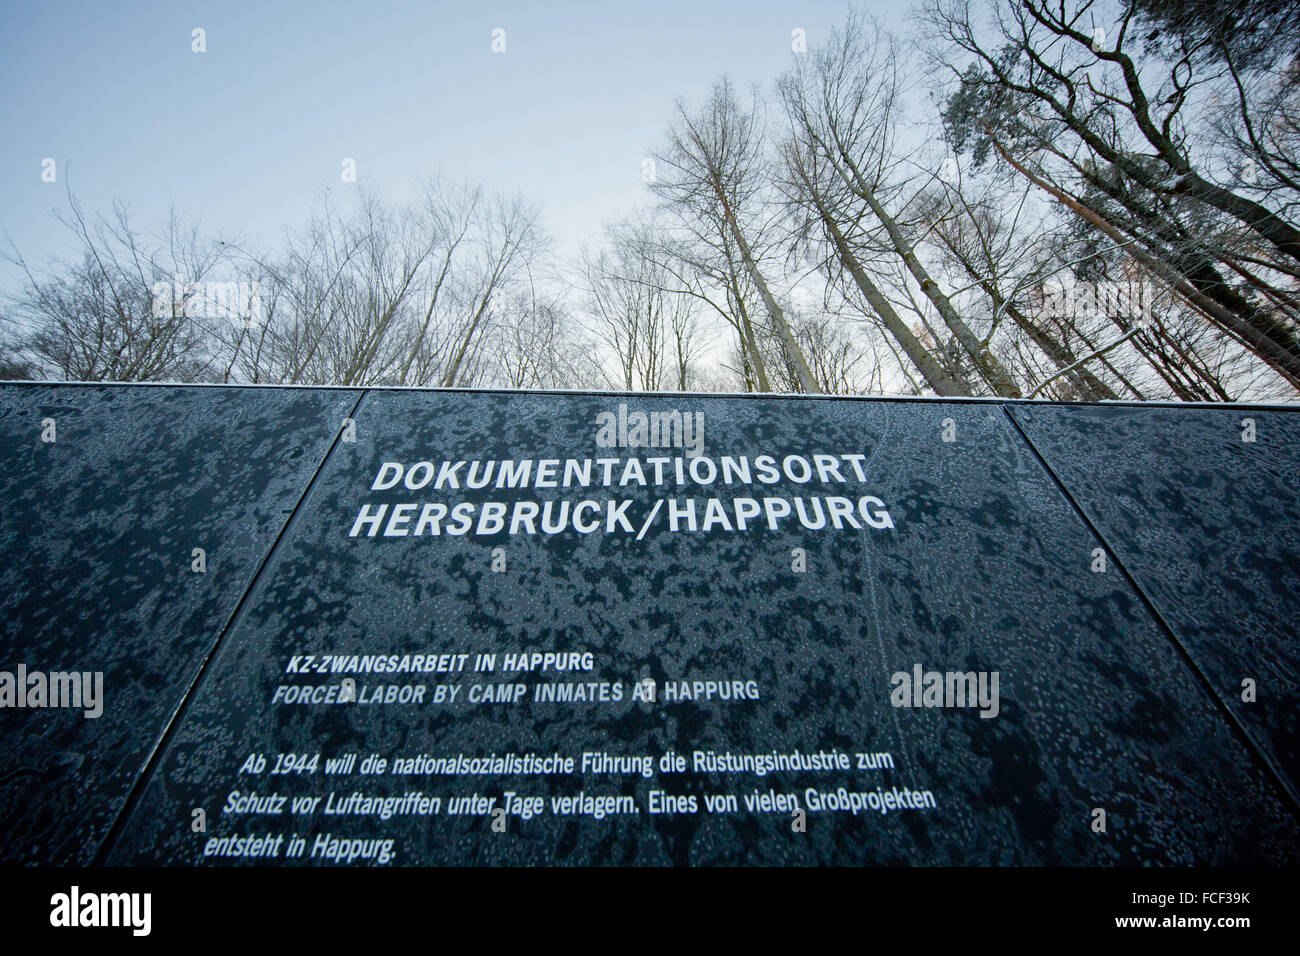 A view of an information panel in the snow covered surroundings of the Holocaust memorial on the premises of the concentration camp documentation centre Hersbruck/Happurg in Hersbruck, Germany, 22 January 2016. The second largest satellite camp of concentration camp Flossenbuerg was located in Hersbruck between July 1944 and April 1945. Up to 1,500 prisoners were held in the camp, who were used as forced labourer to build the facilities for an underground armaments factory. The documentation centre Hersbruck/Happurg will open officially on 25 January 2016. PHOTO: DANIEL KARMANN/dpa Stock Photo